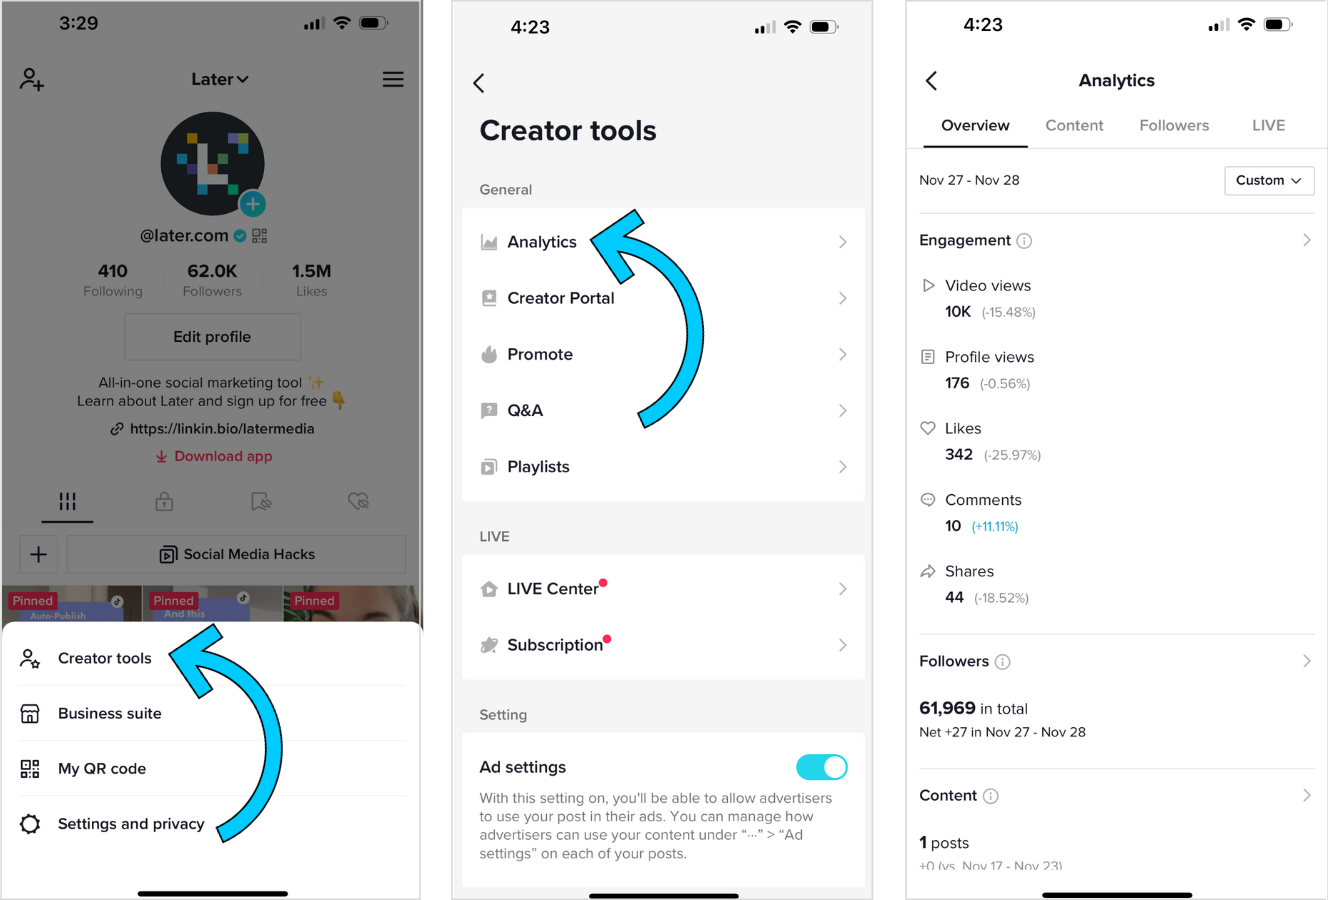 Screenshots showing the steps for discovering your TikTok analytics if you have a Creator account